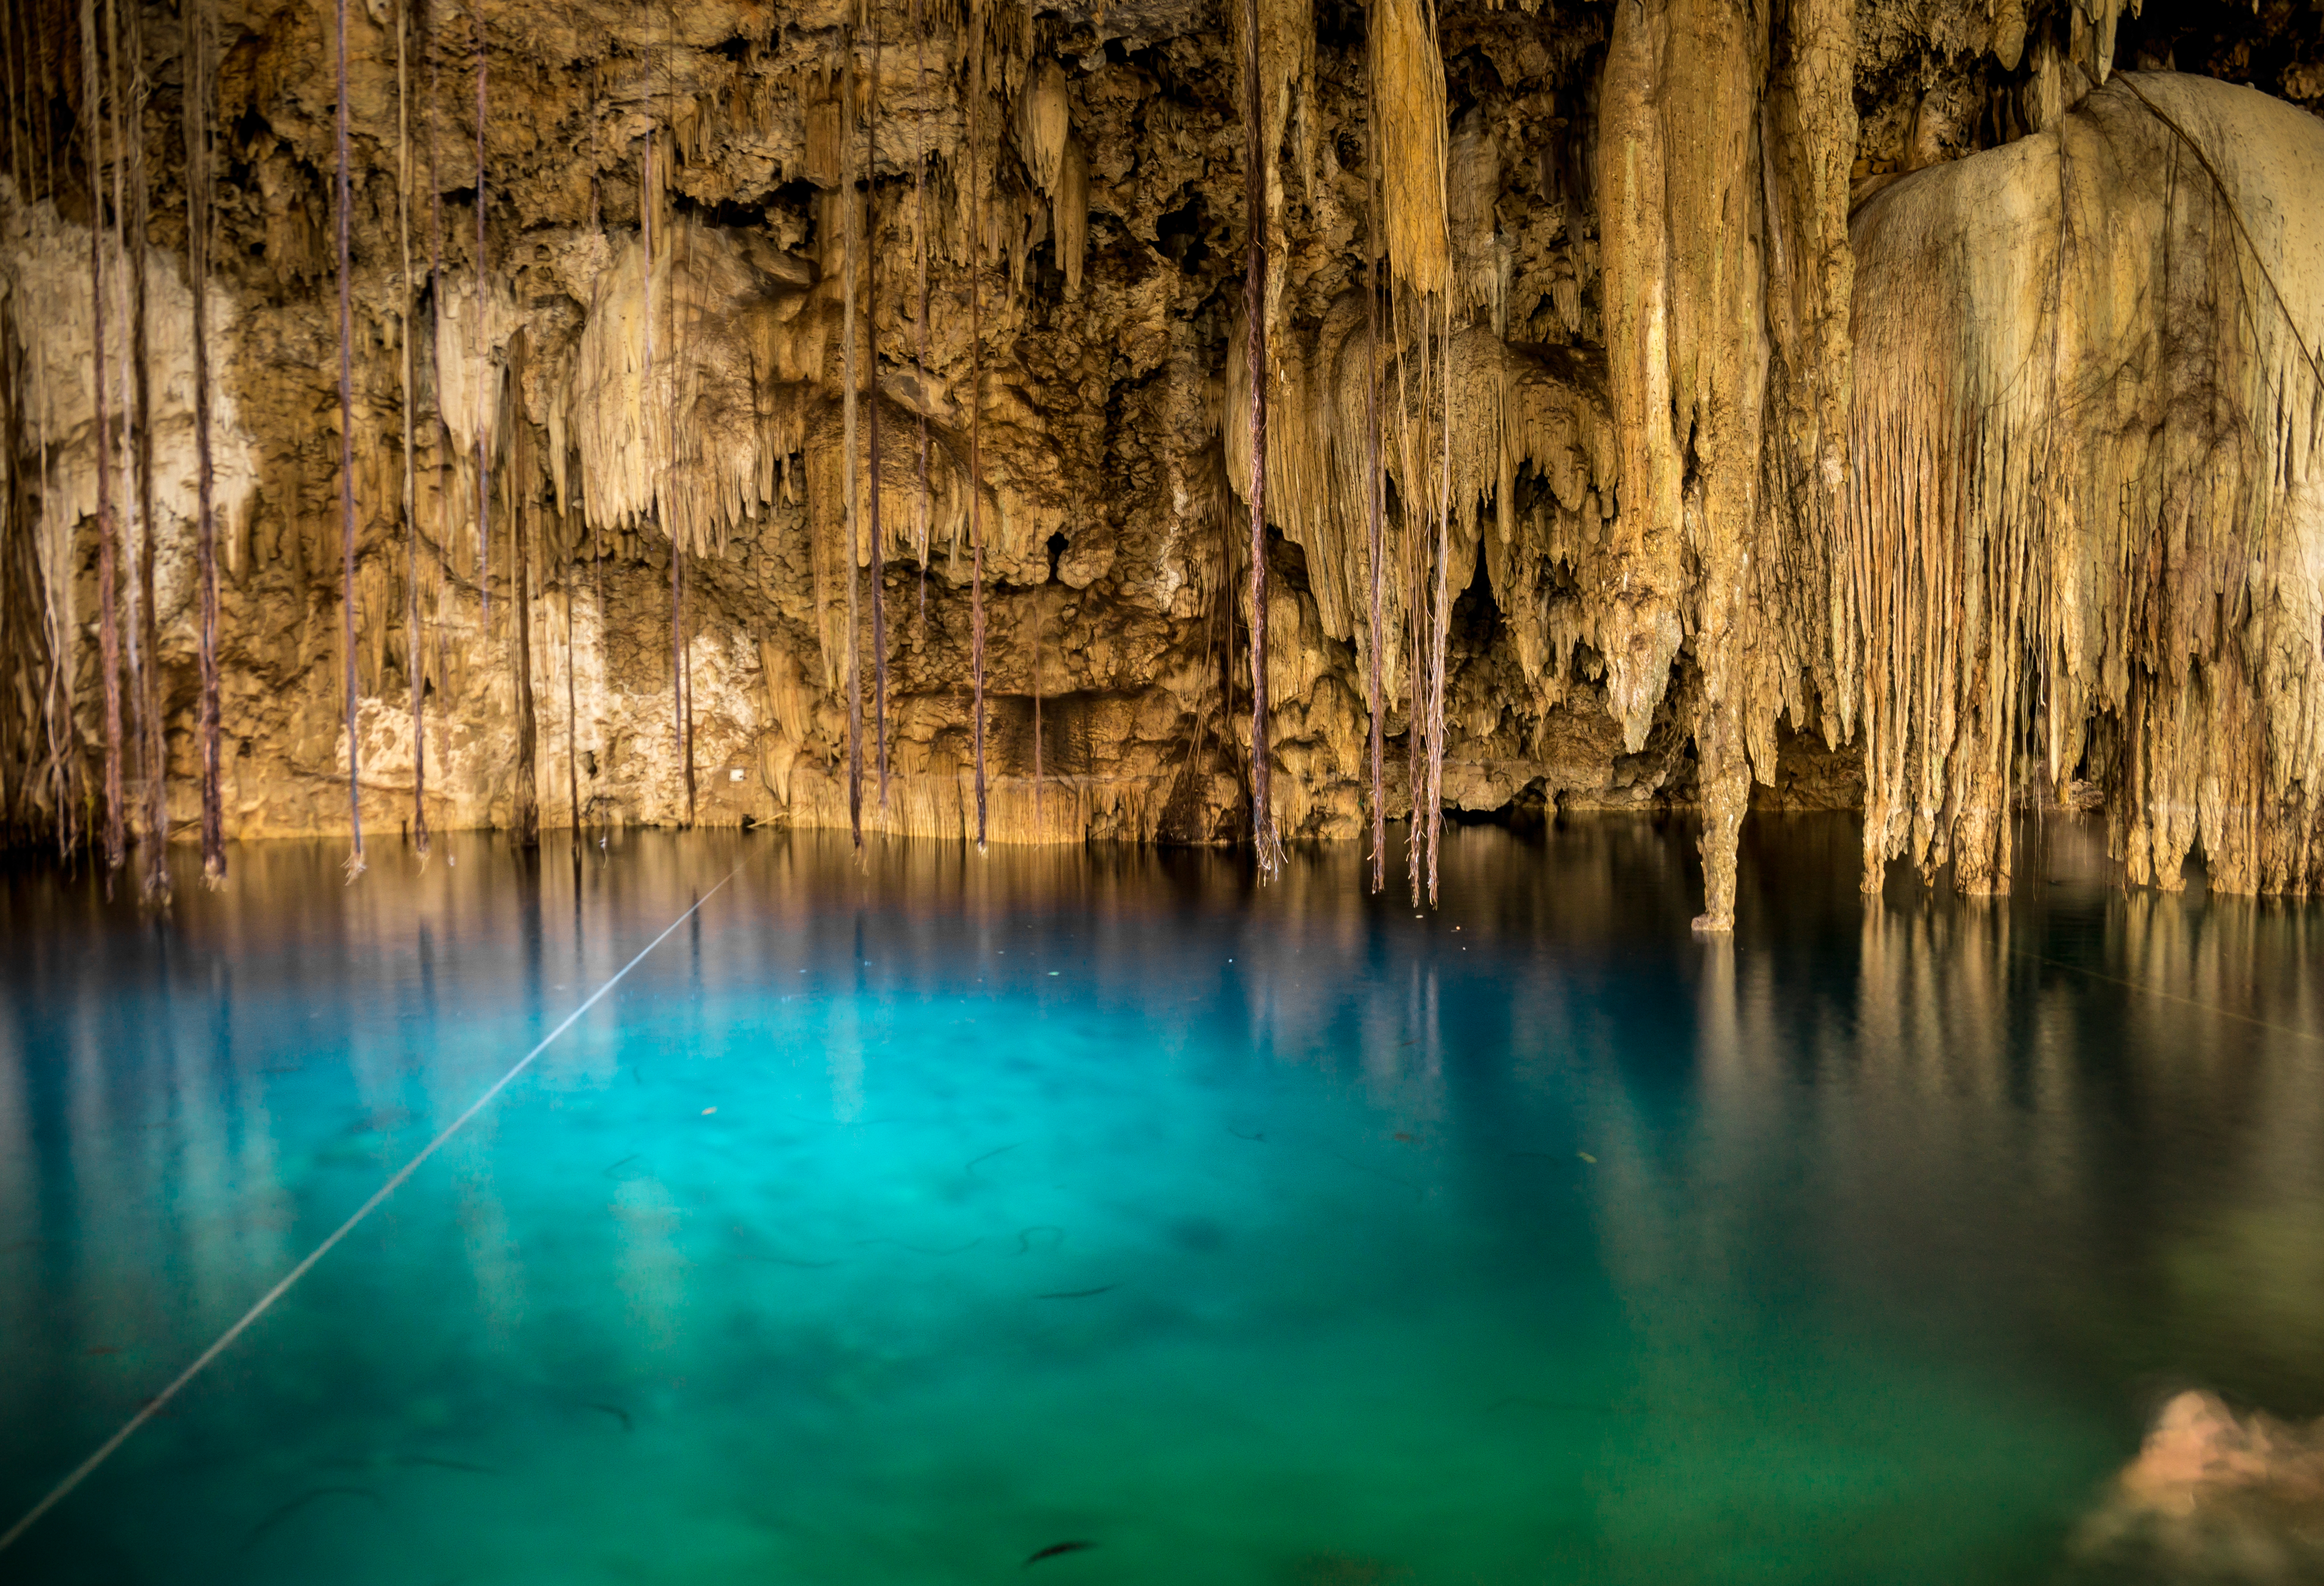 Consider These Unique Places to Visit in Mexico for Your Family Vacation - Xkeken Cenote